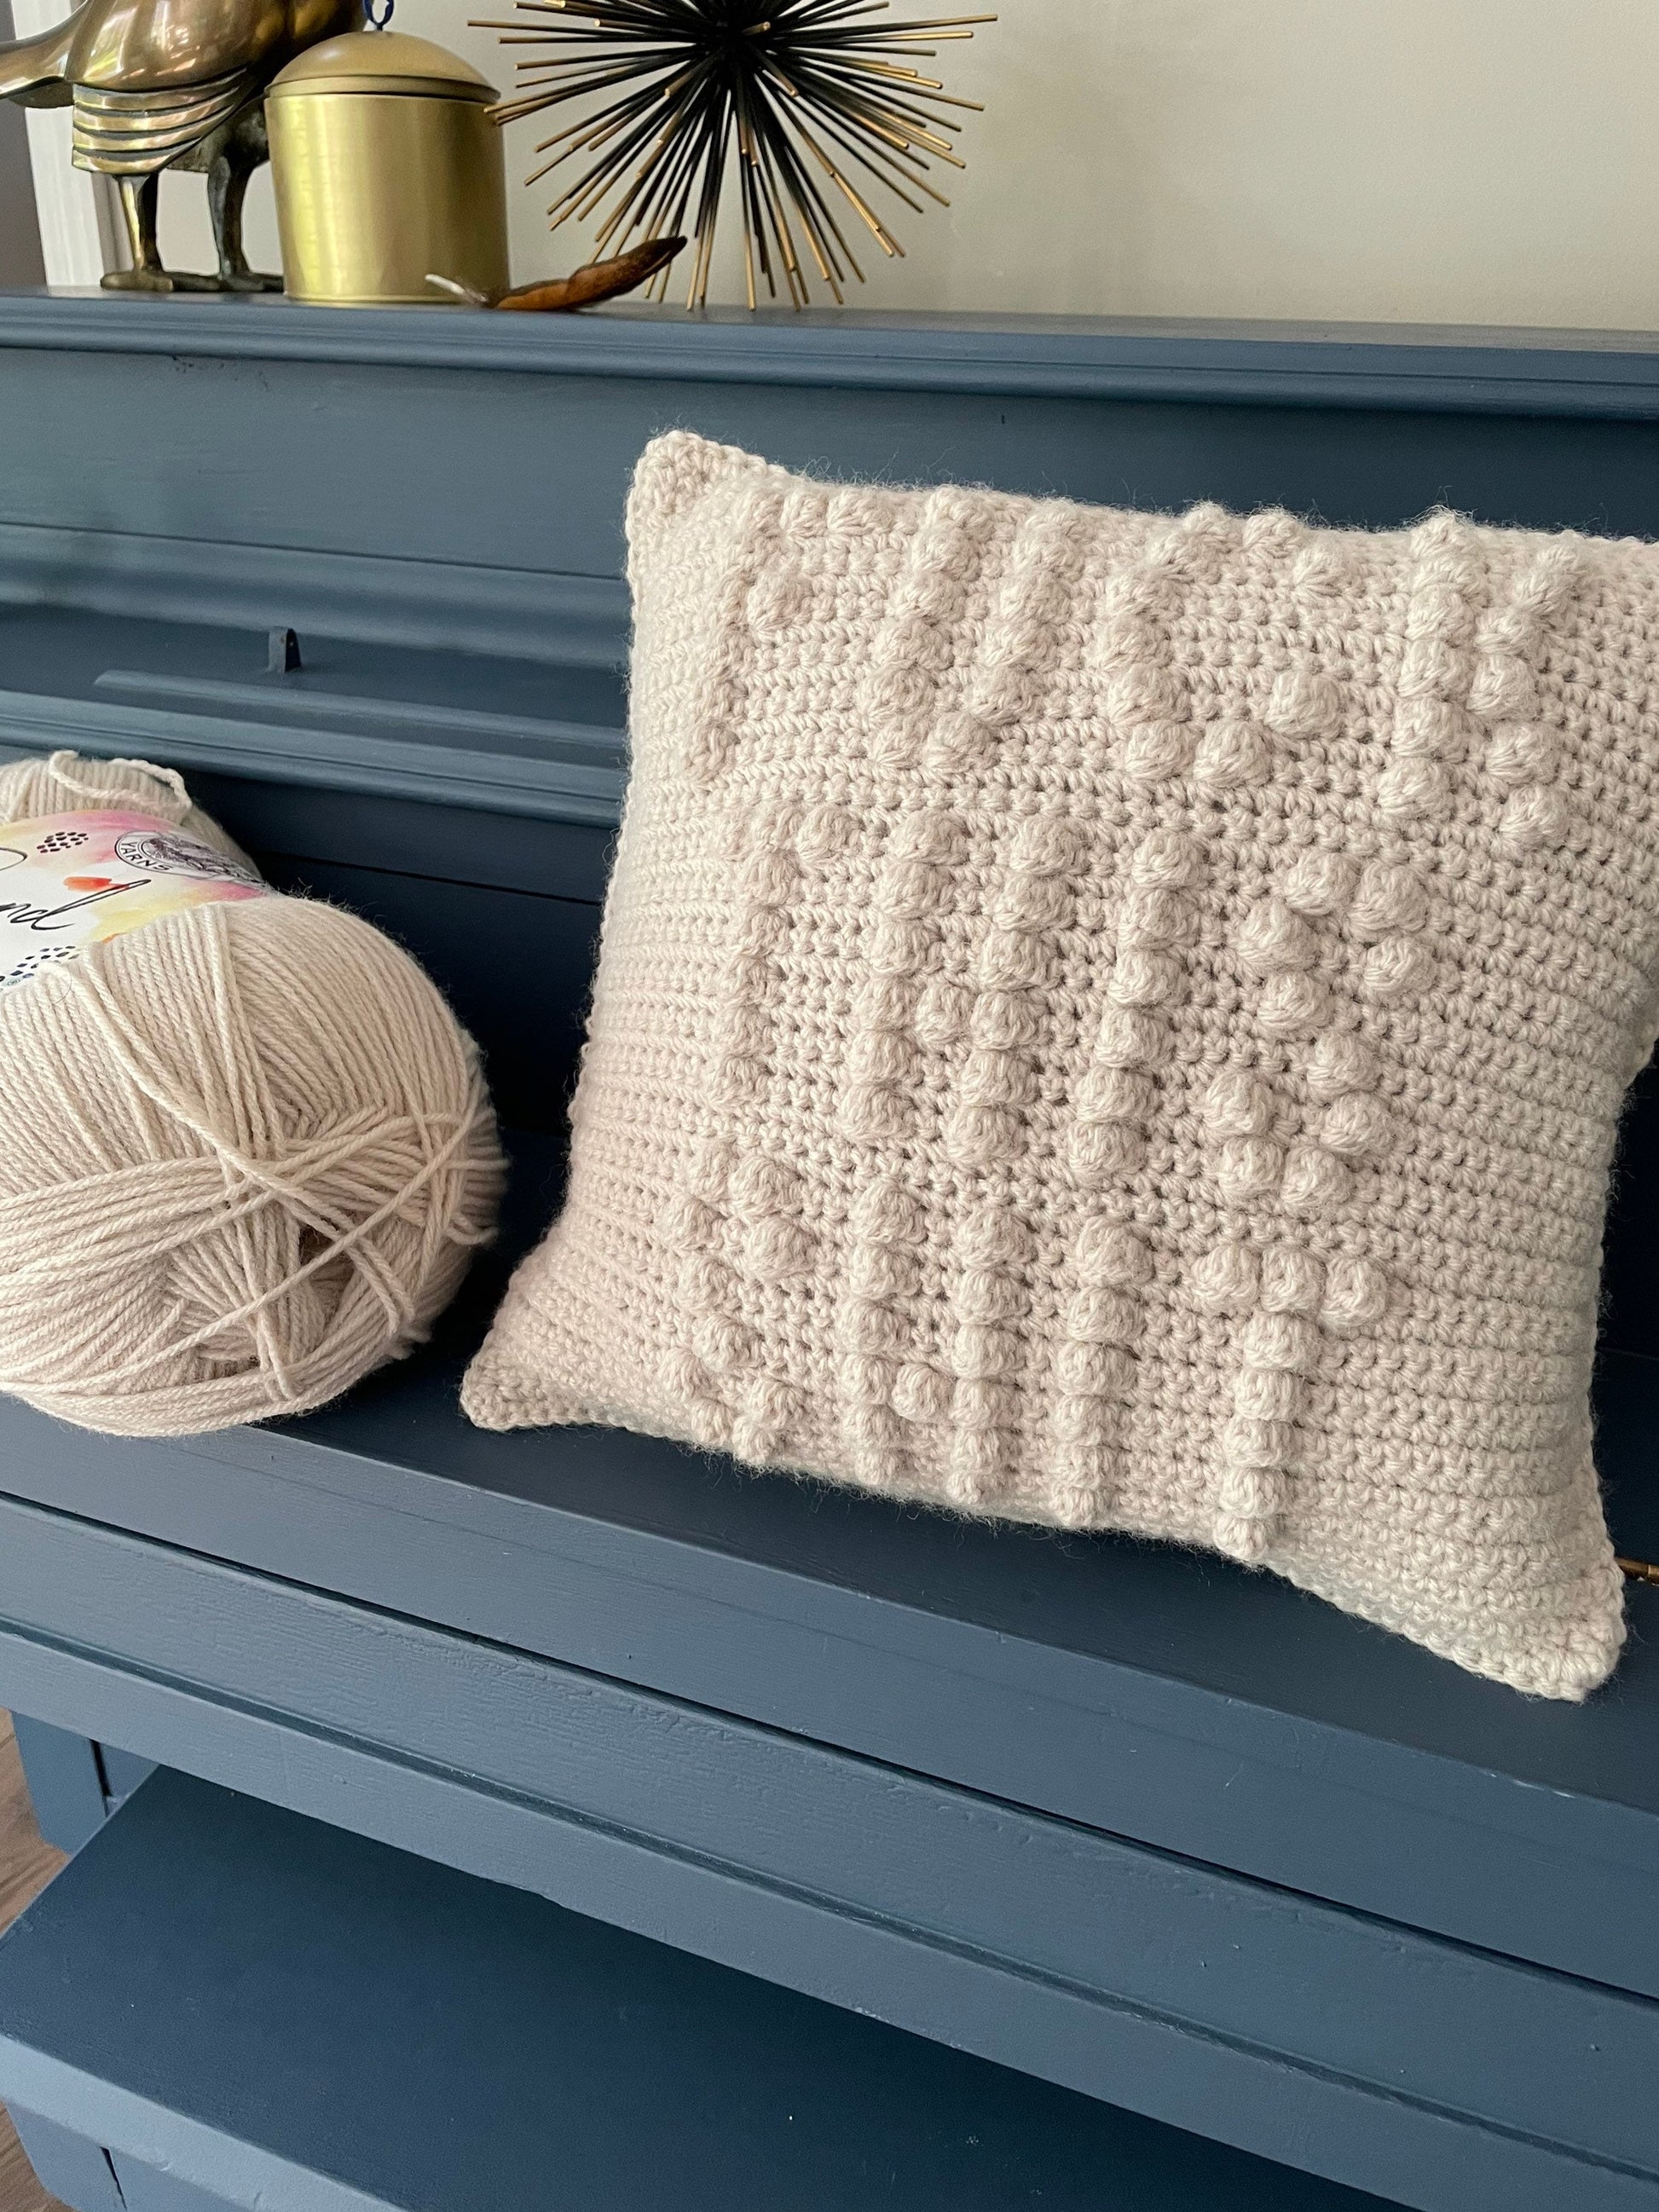 CROCHET PATTERN- F This S Pillow, Fuck Pillow, Fuck This Shit